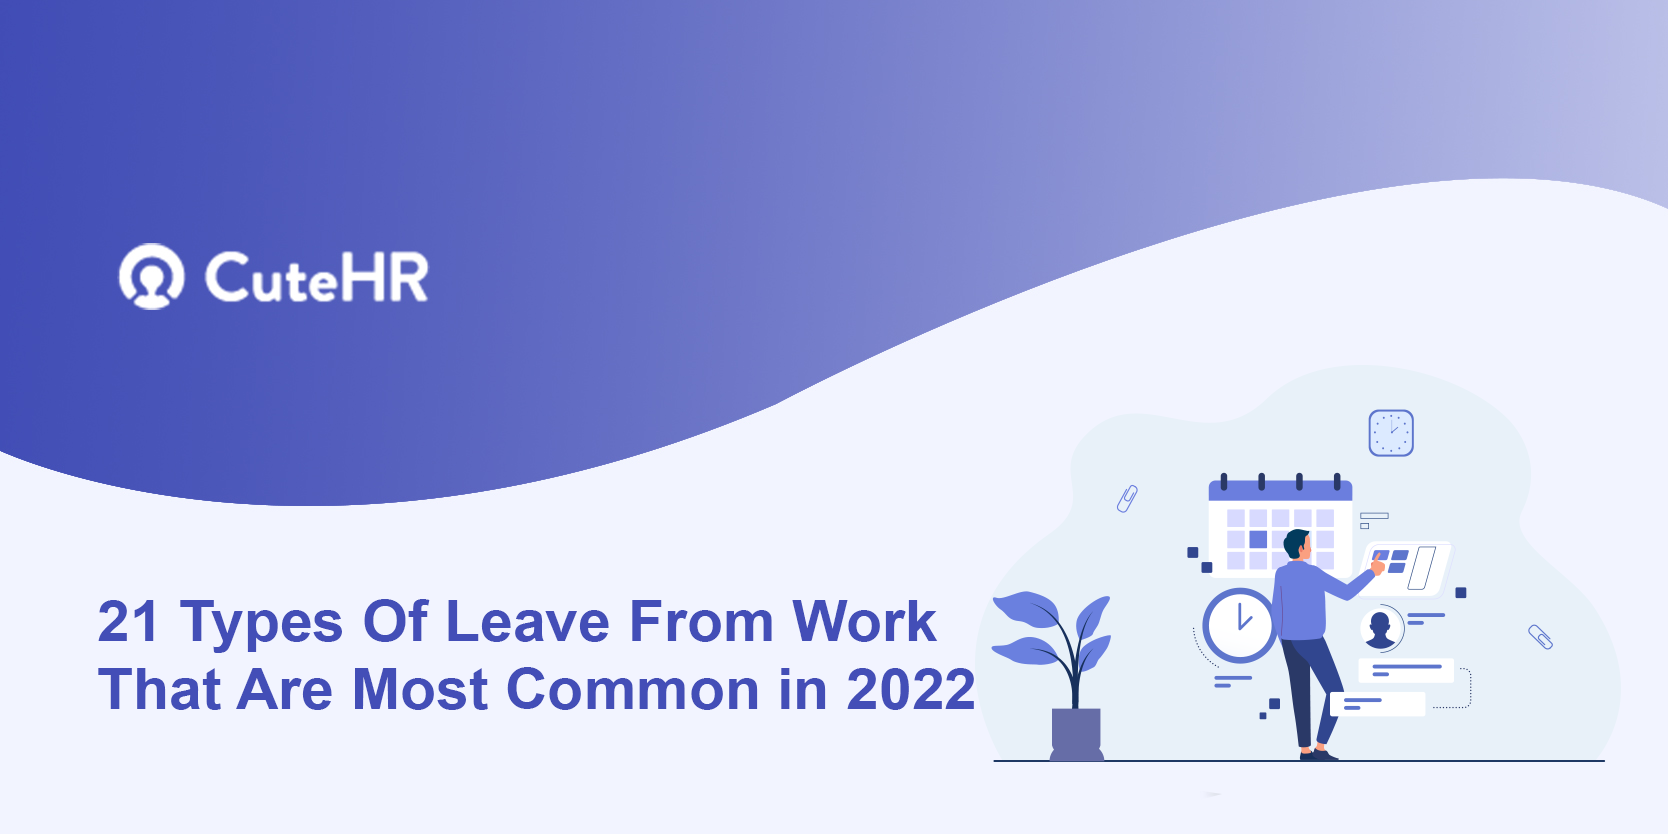 21 Types Of Leave From Work That Are Most Common in 2022